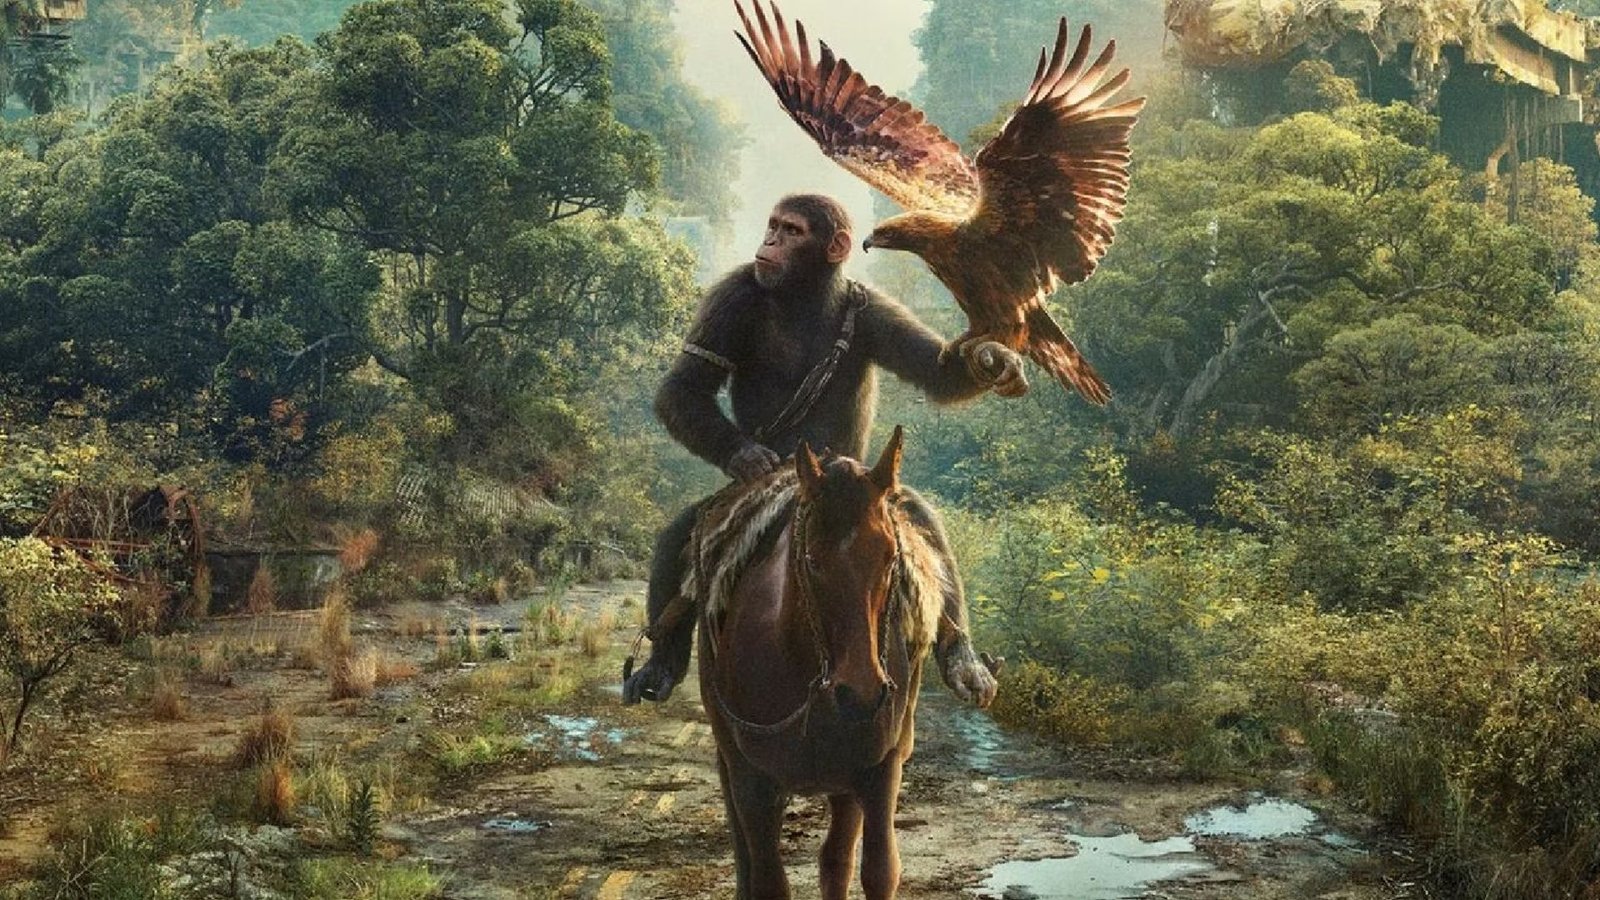 Kingdom of the Planet of the Apes’ Reign Begins at No. 1